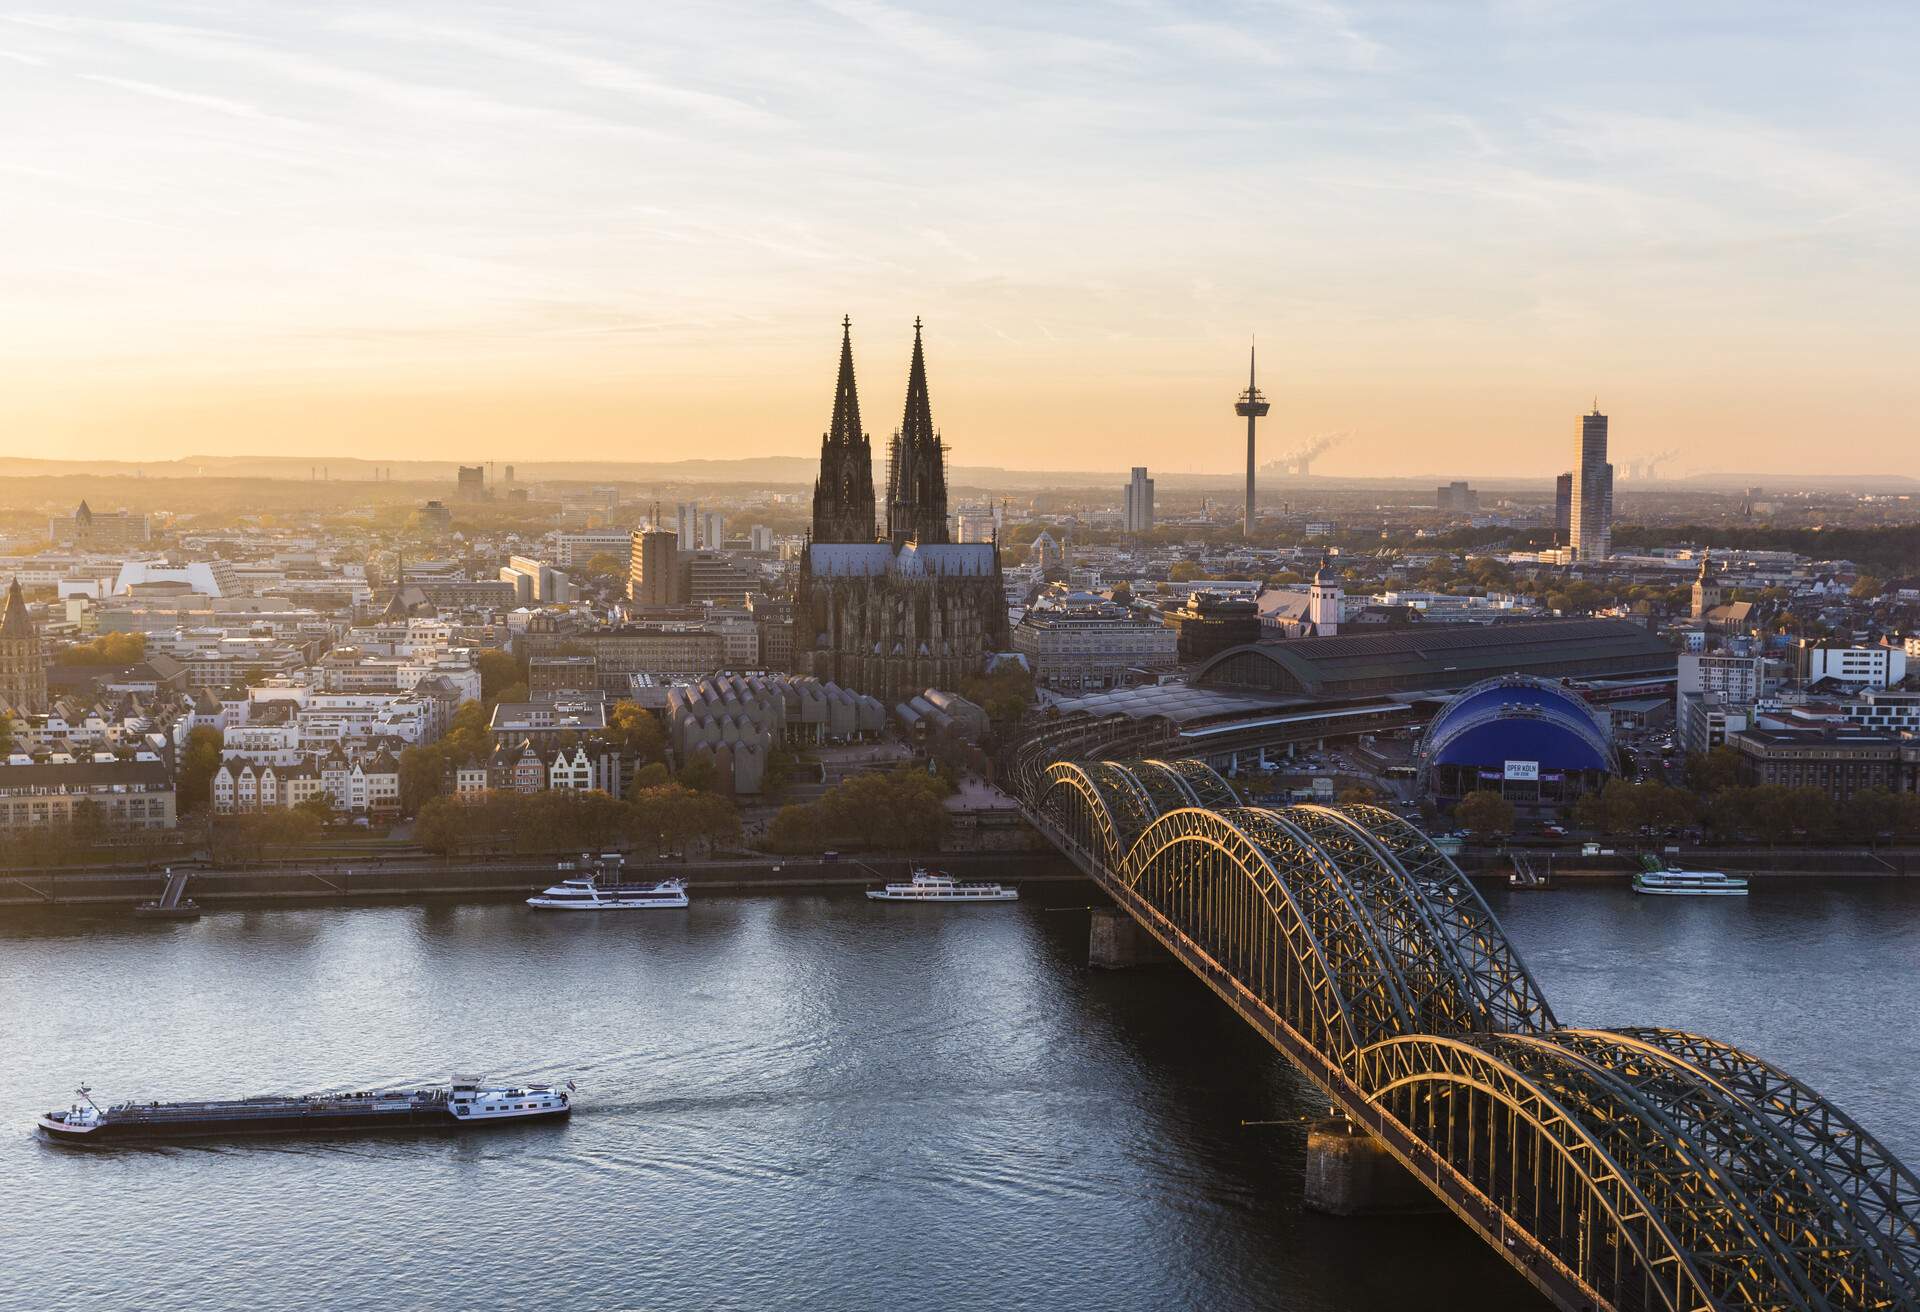 Elevated View of Hohenzollern Railroad Bridge over River Rhine by Cologne Cathedral at Sunset, North Rhine-Westphalia, Germany.